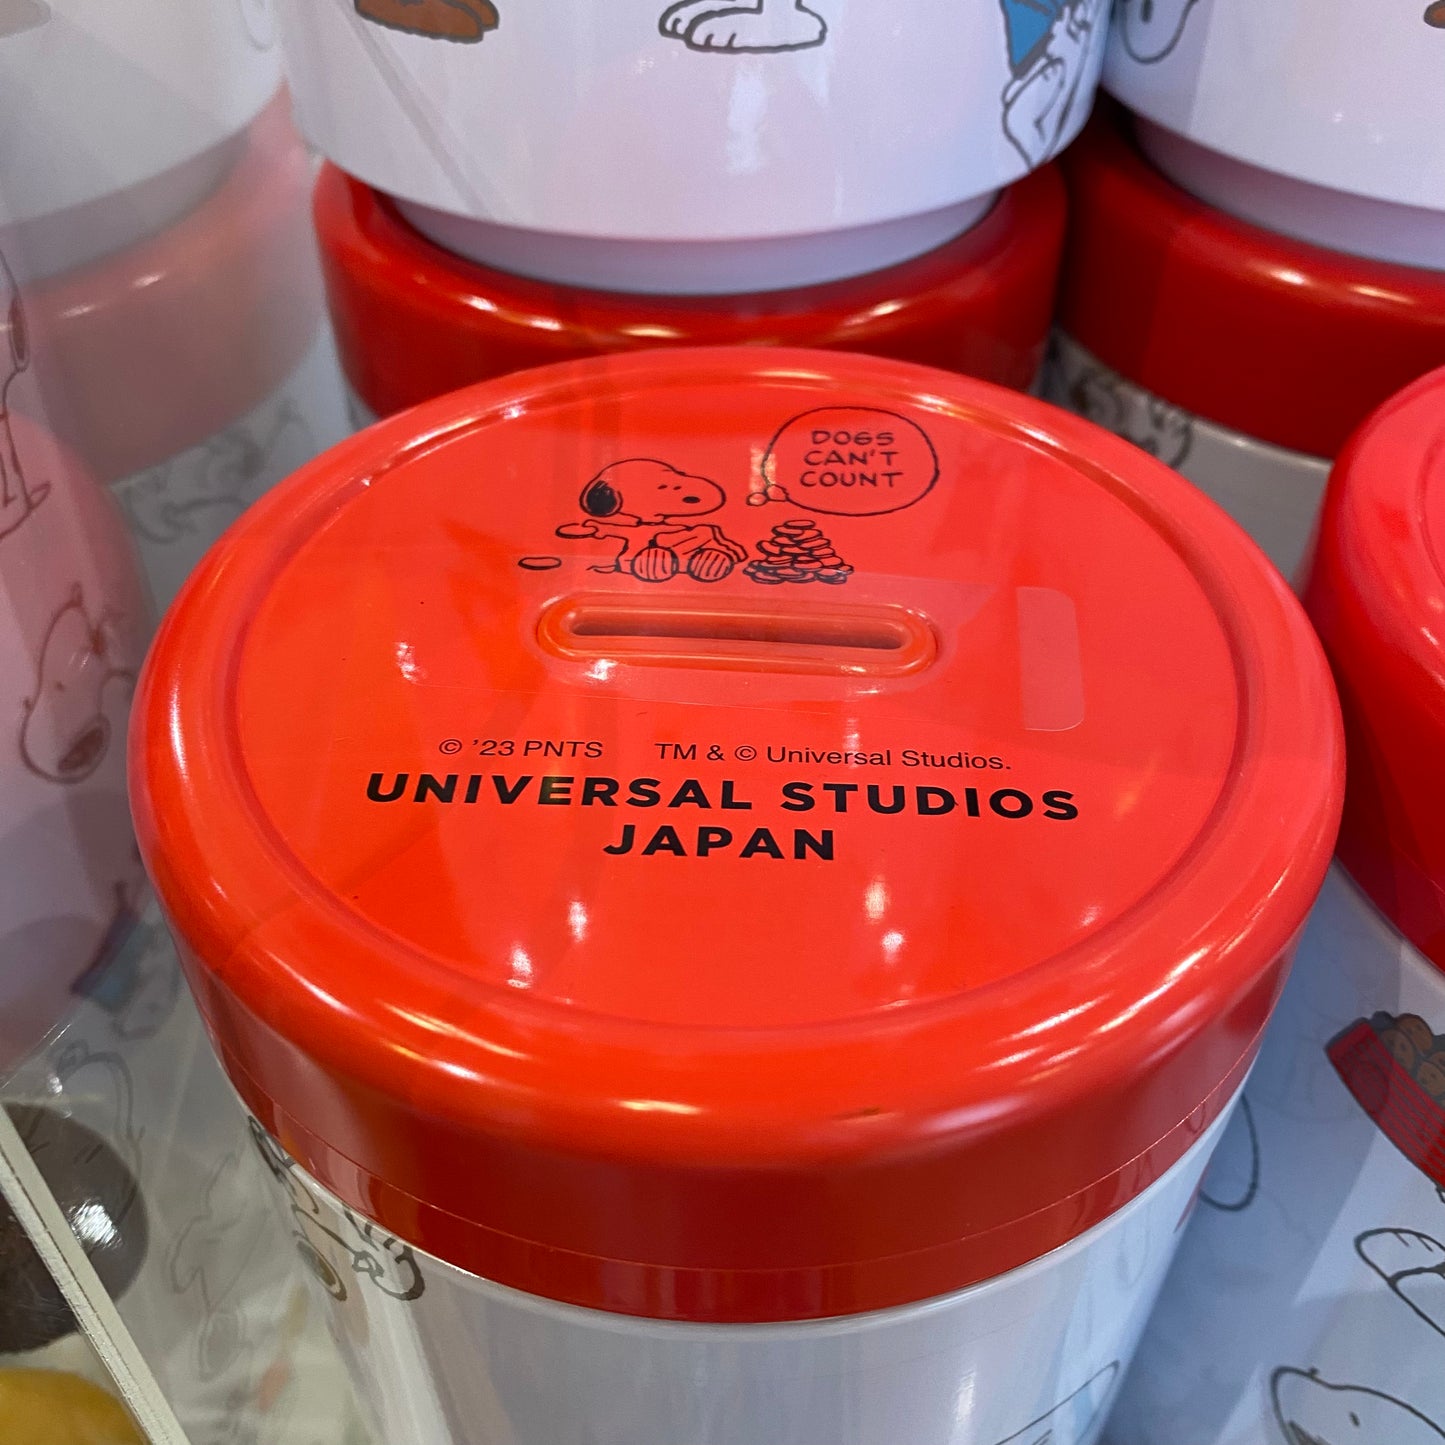 【Order】USJ Snoopy Cocoa and Chocolate Chip Cookie Money Box